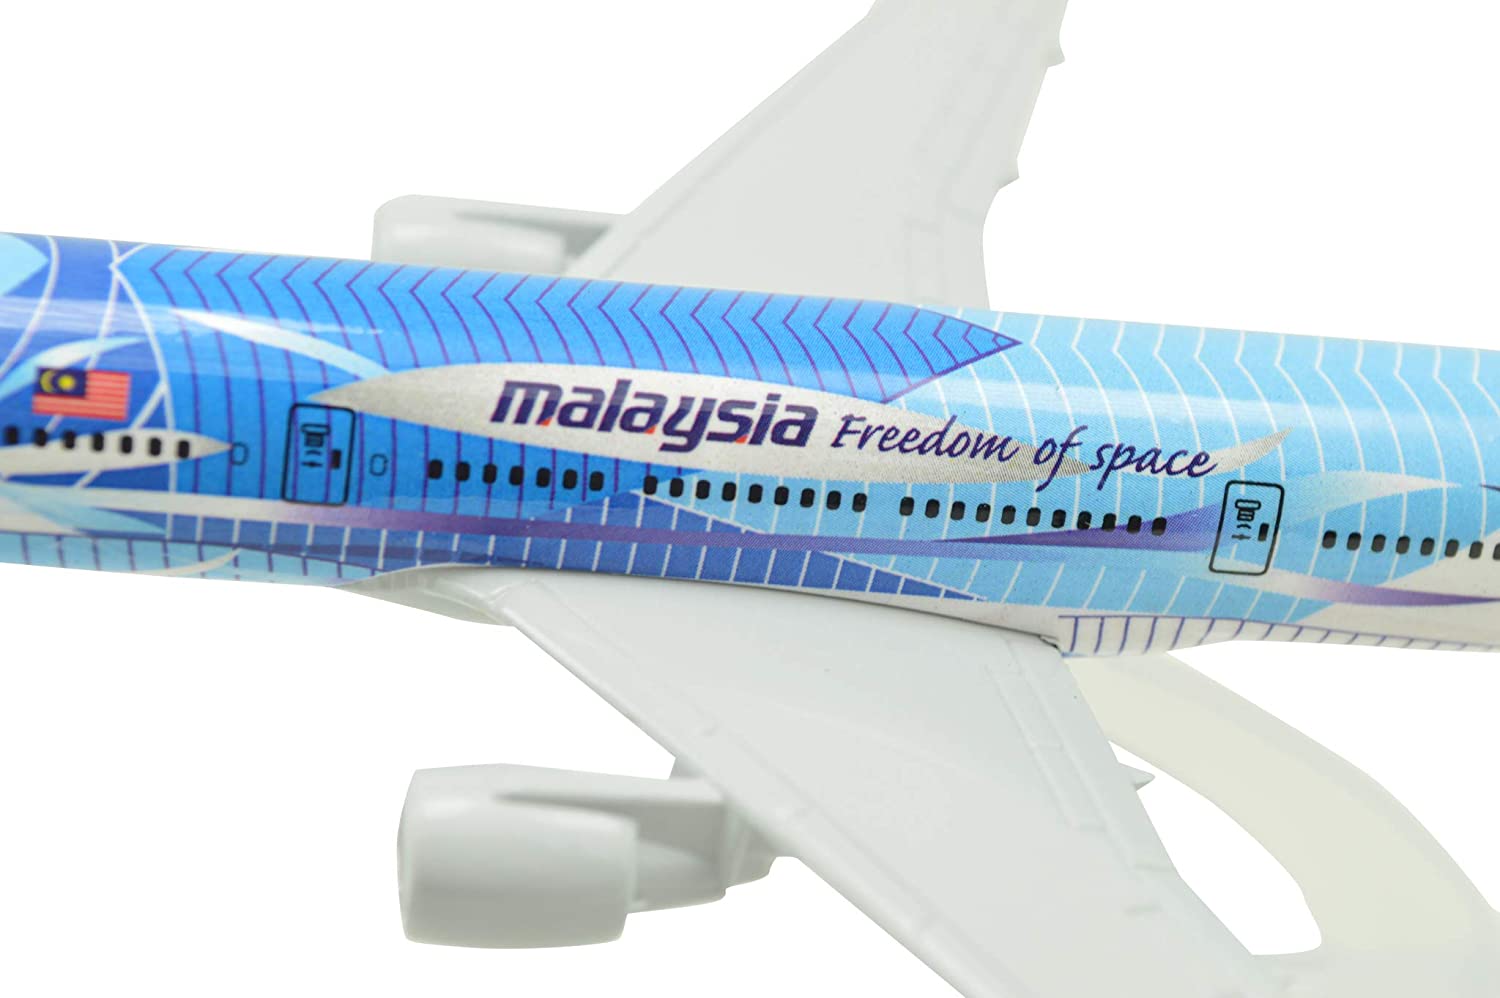 1:400 16cm B777 Malaysia Airlines Sea Wave Painting Metal Airplane Model Plane Toy Plane Model TANG DYNASTY TM 